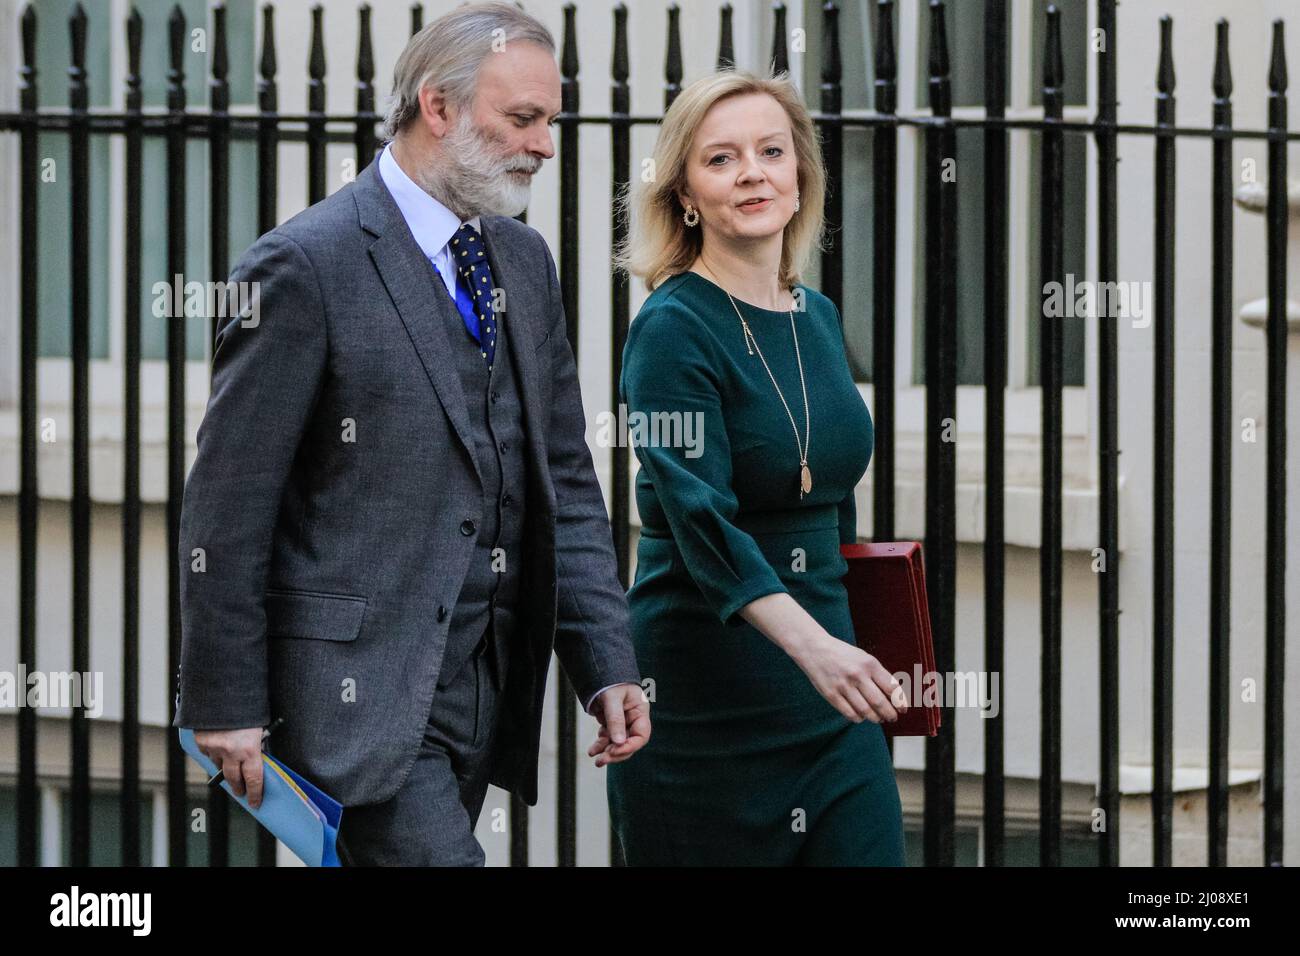 London, UK. 17th Mar, 2022. Liz Truss MP (Elizabeth Truss), Secretary of State for Foreign, Commonwealth and Development Affairs; Minister for Women and Equalities, is seen in Downing Street with Sir Tim Barrow, Political Director at the Foreign Office. Credit: Imageplotter/Alamy Live News Stock Photo